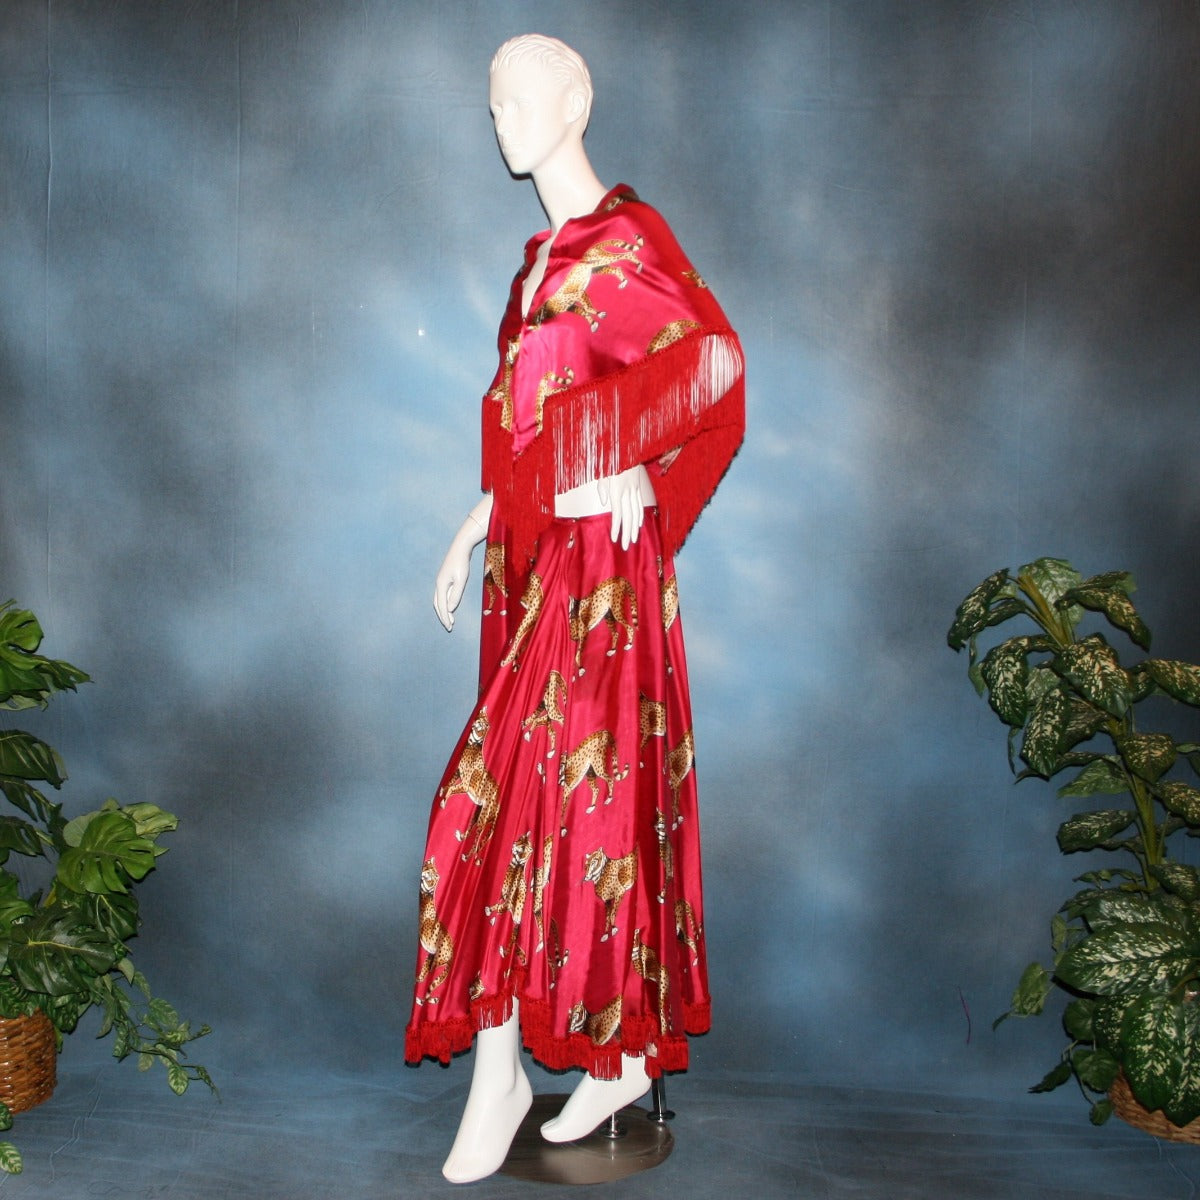 side view of Red full circle ballroom skirt with chainette fringe was created of red satin with cheetah print along with matching shawl to team with a bodysuit or top. I can envision custom creating a body suit of cheetah fabric to team with this...actually would be fun to create a few to mix & match with this ballroom skirt set...some with Swarovski work!!